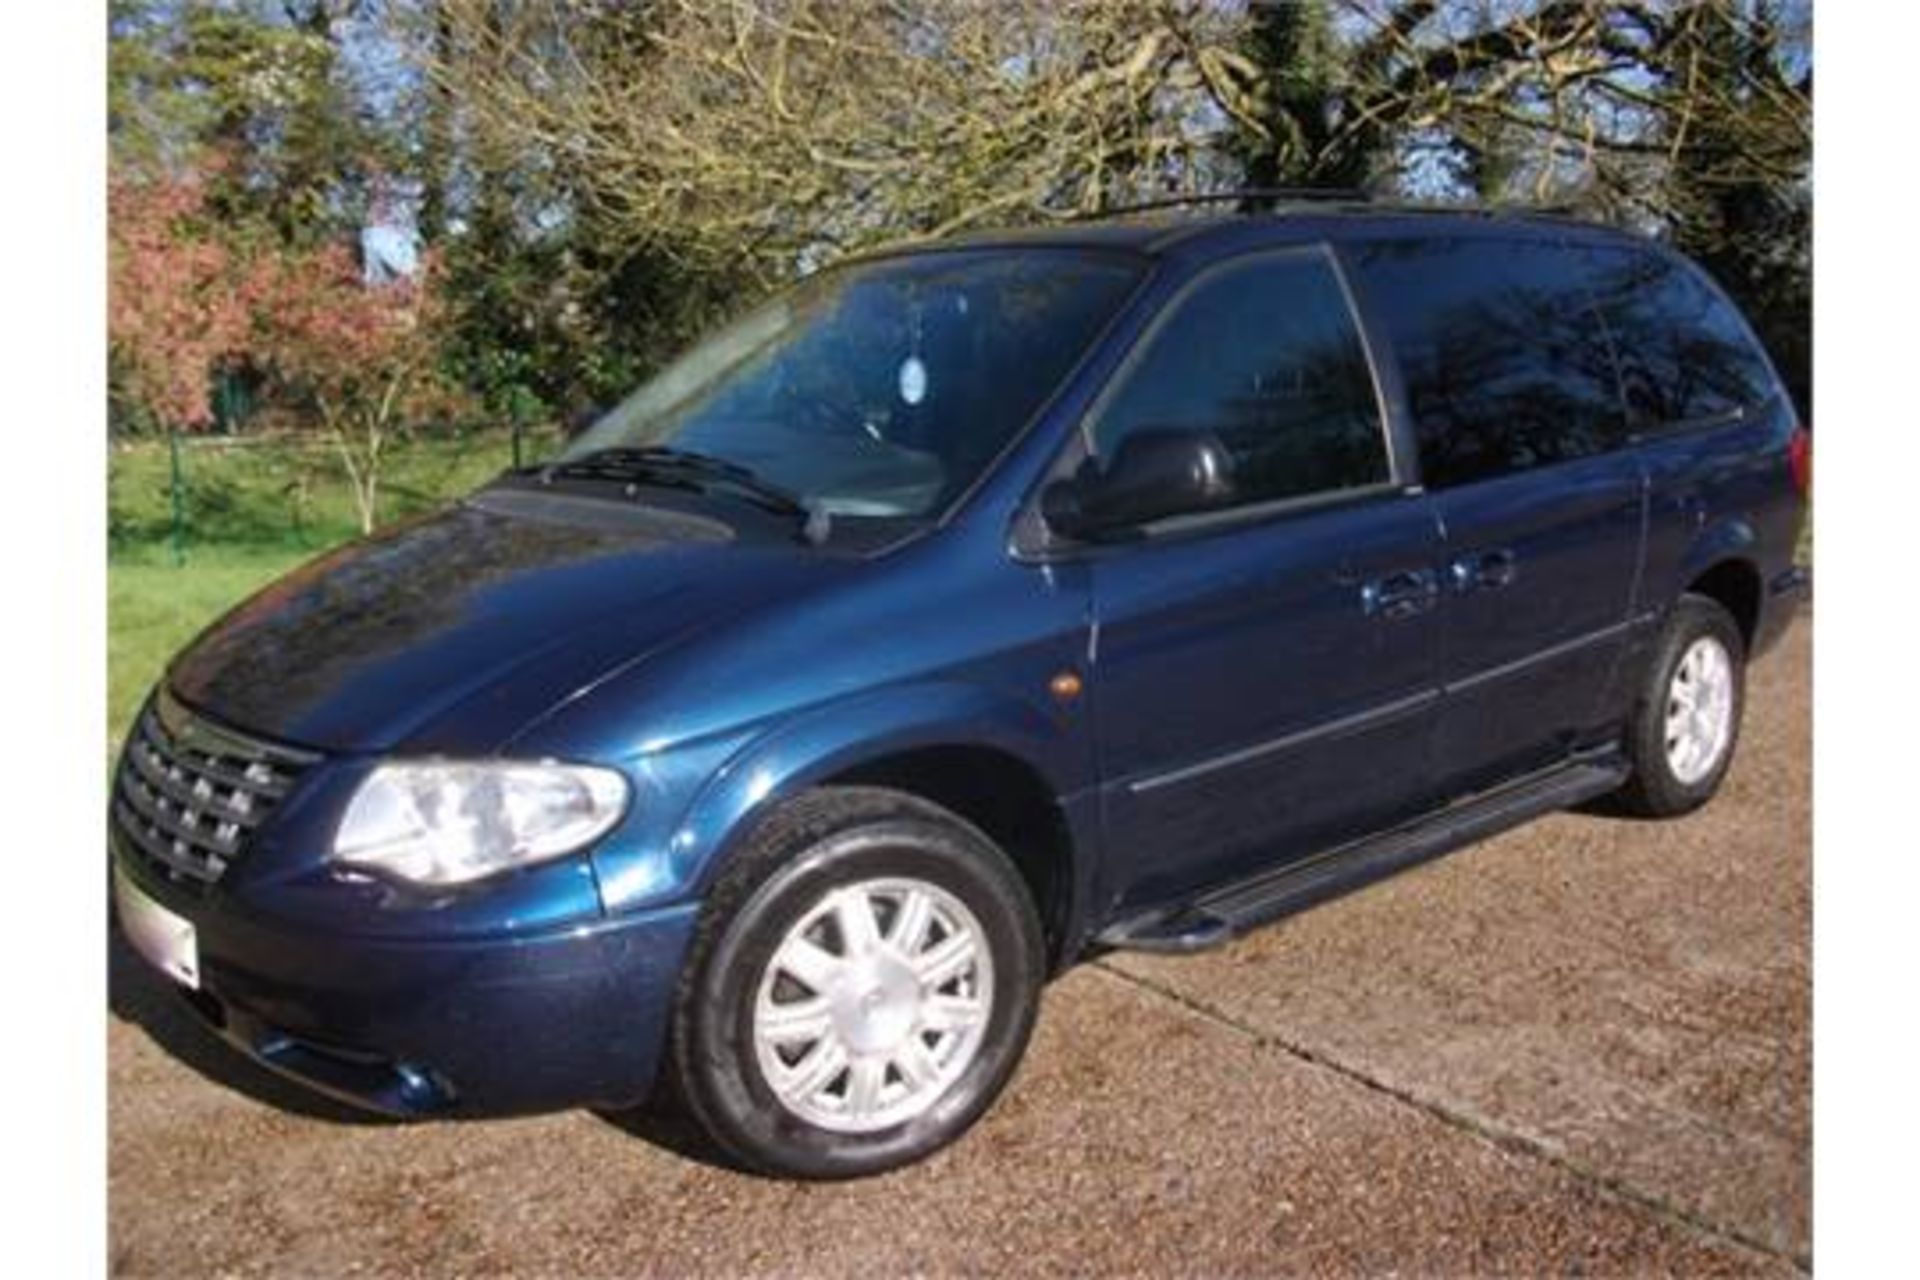 CHRYSLER GRAND VOYAGER 2.8 CRD DIESEL LIMITED 7 SEATS, STOW&GO SEATS